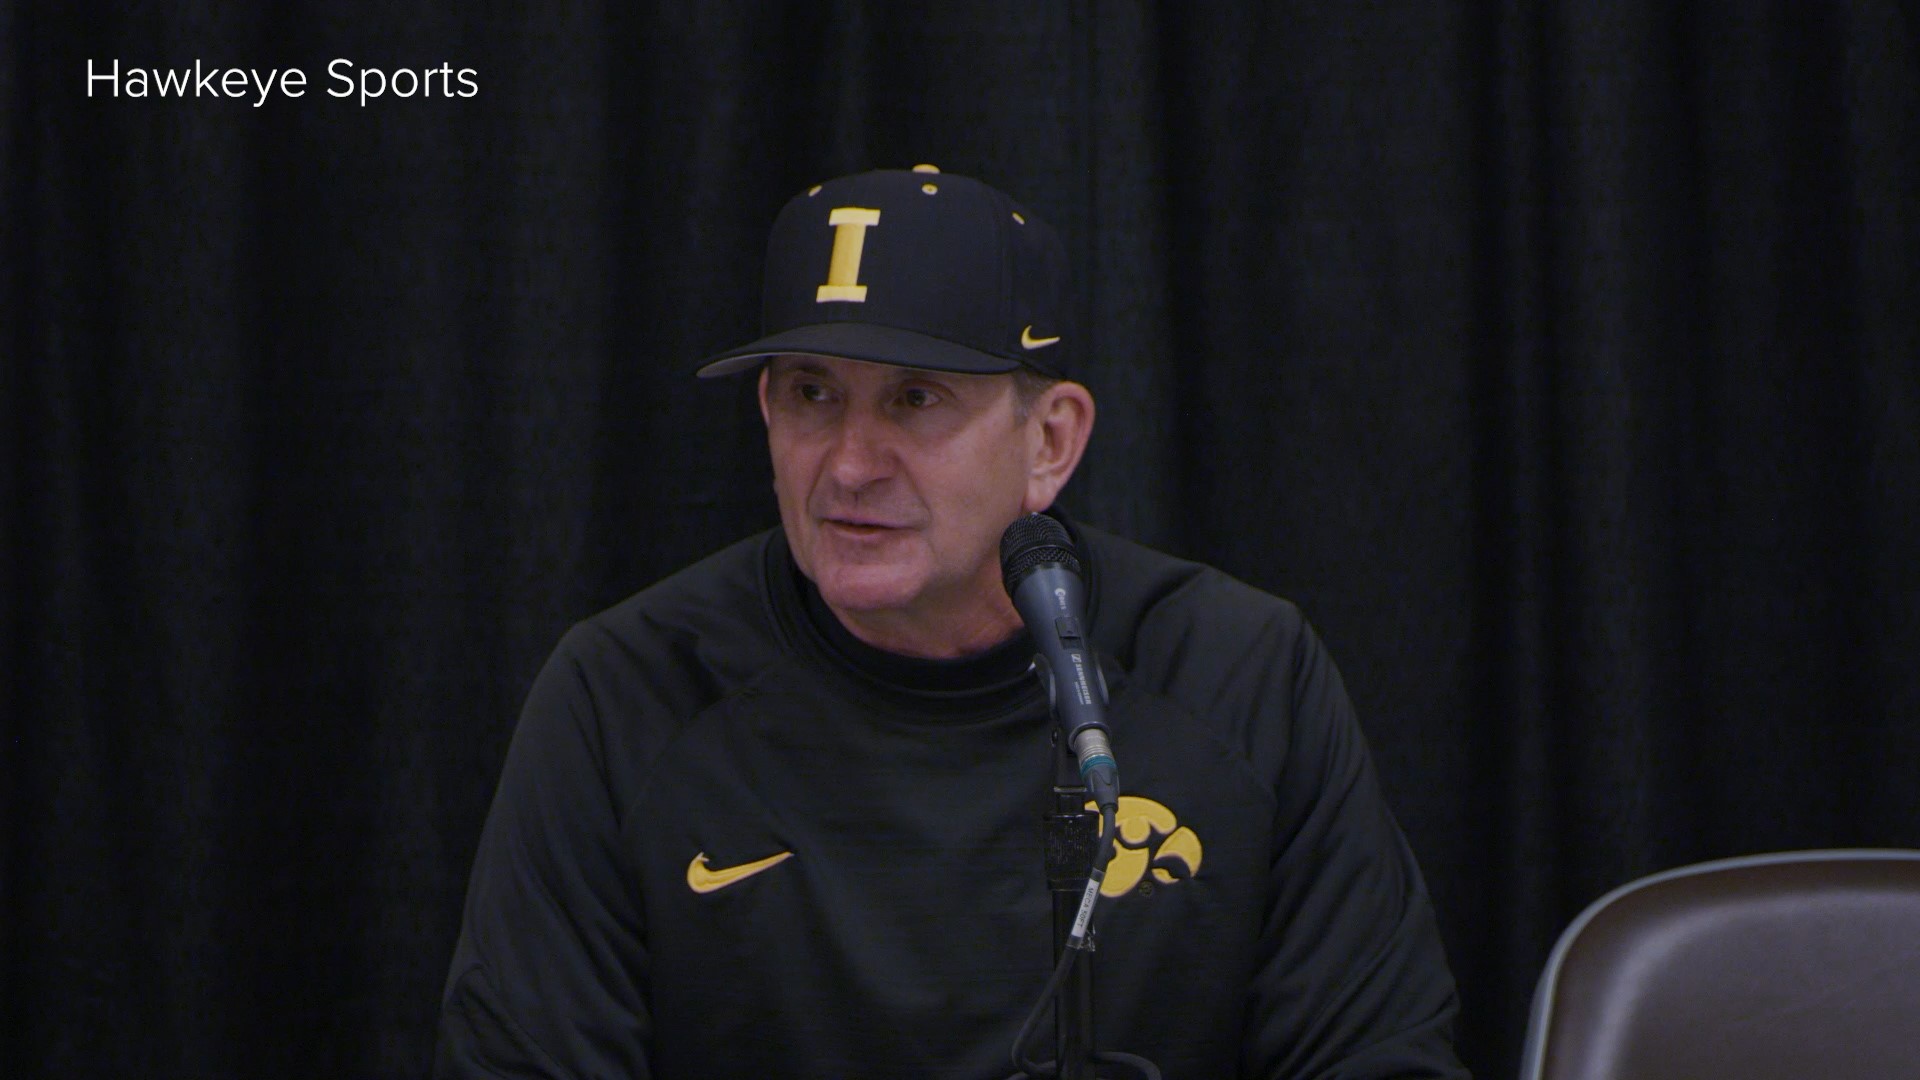 The Hawkeyes will face 2-seed Rutgers or 7-seed Purdue in an elimination game Friday at 9 a.m.